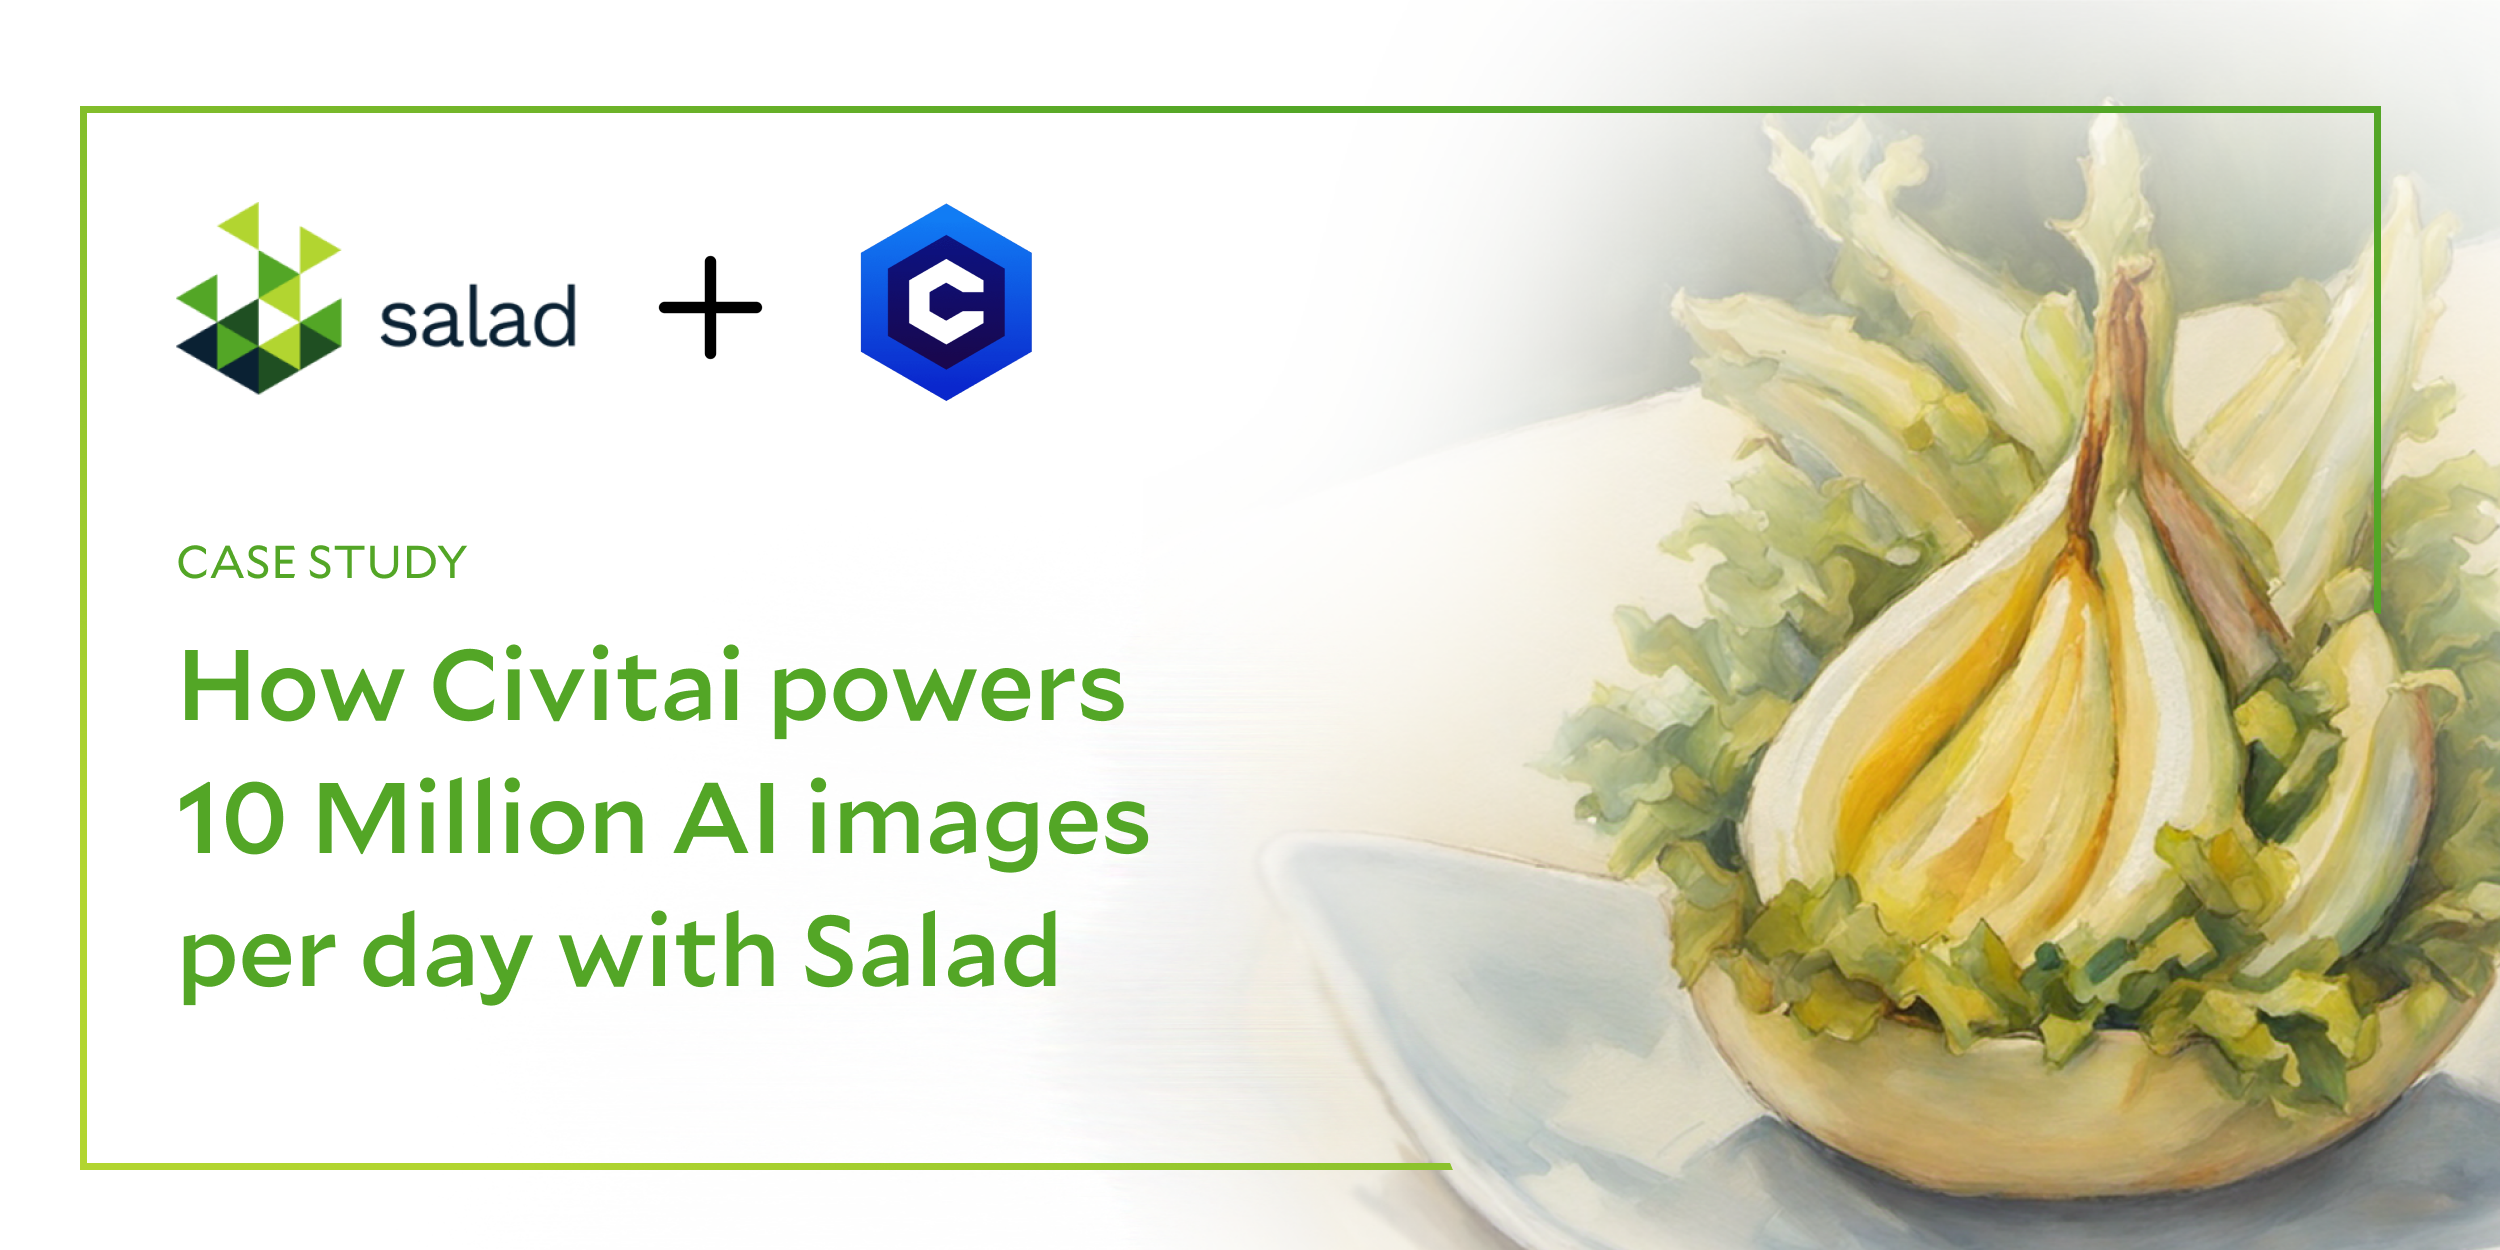 Civitai powers 10 Million AI images per day with Salad